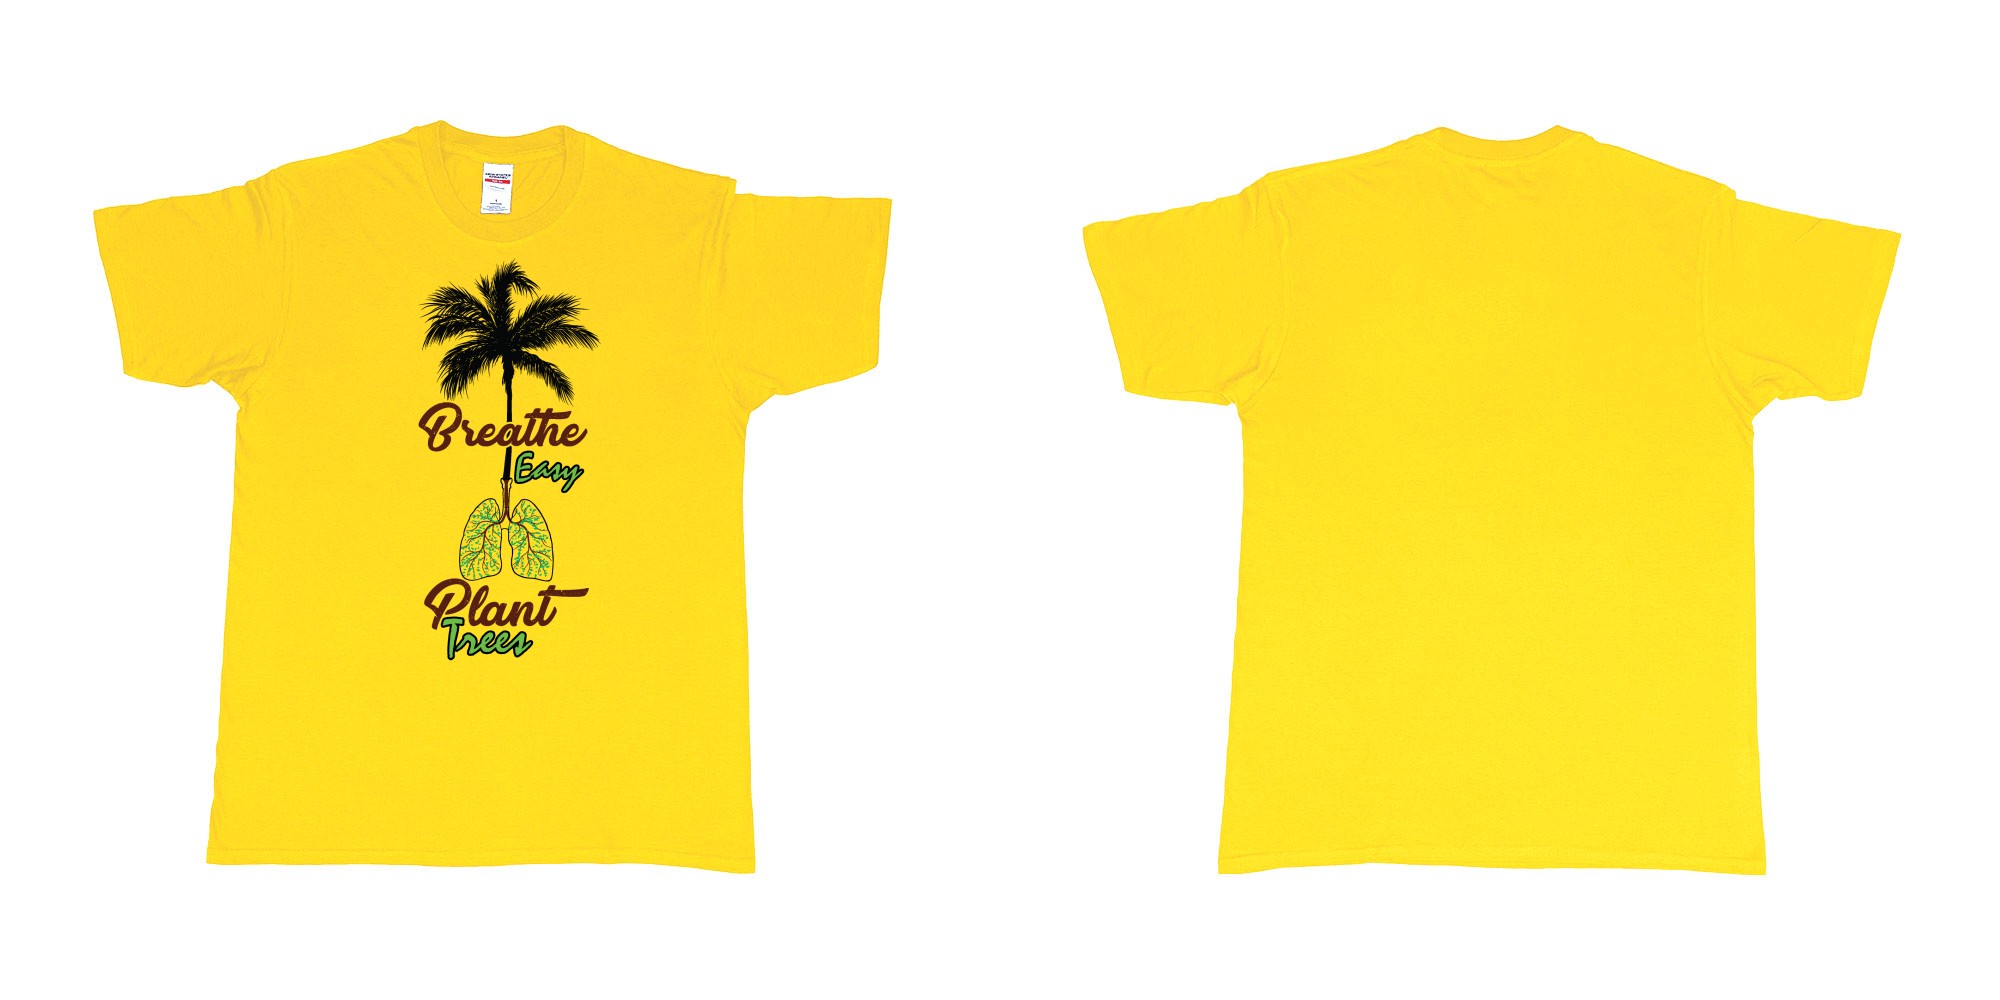 Custom tshirt design breathe easy and plant a tree for better air for everyone in fabric color daisy choice your own text made in Bali by The Pirate Way